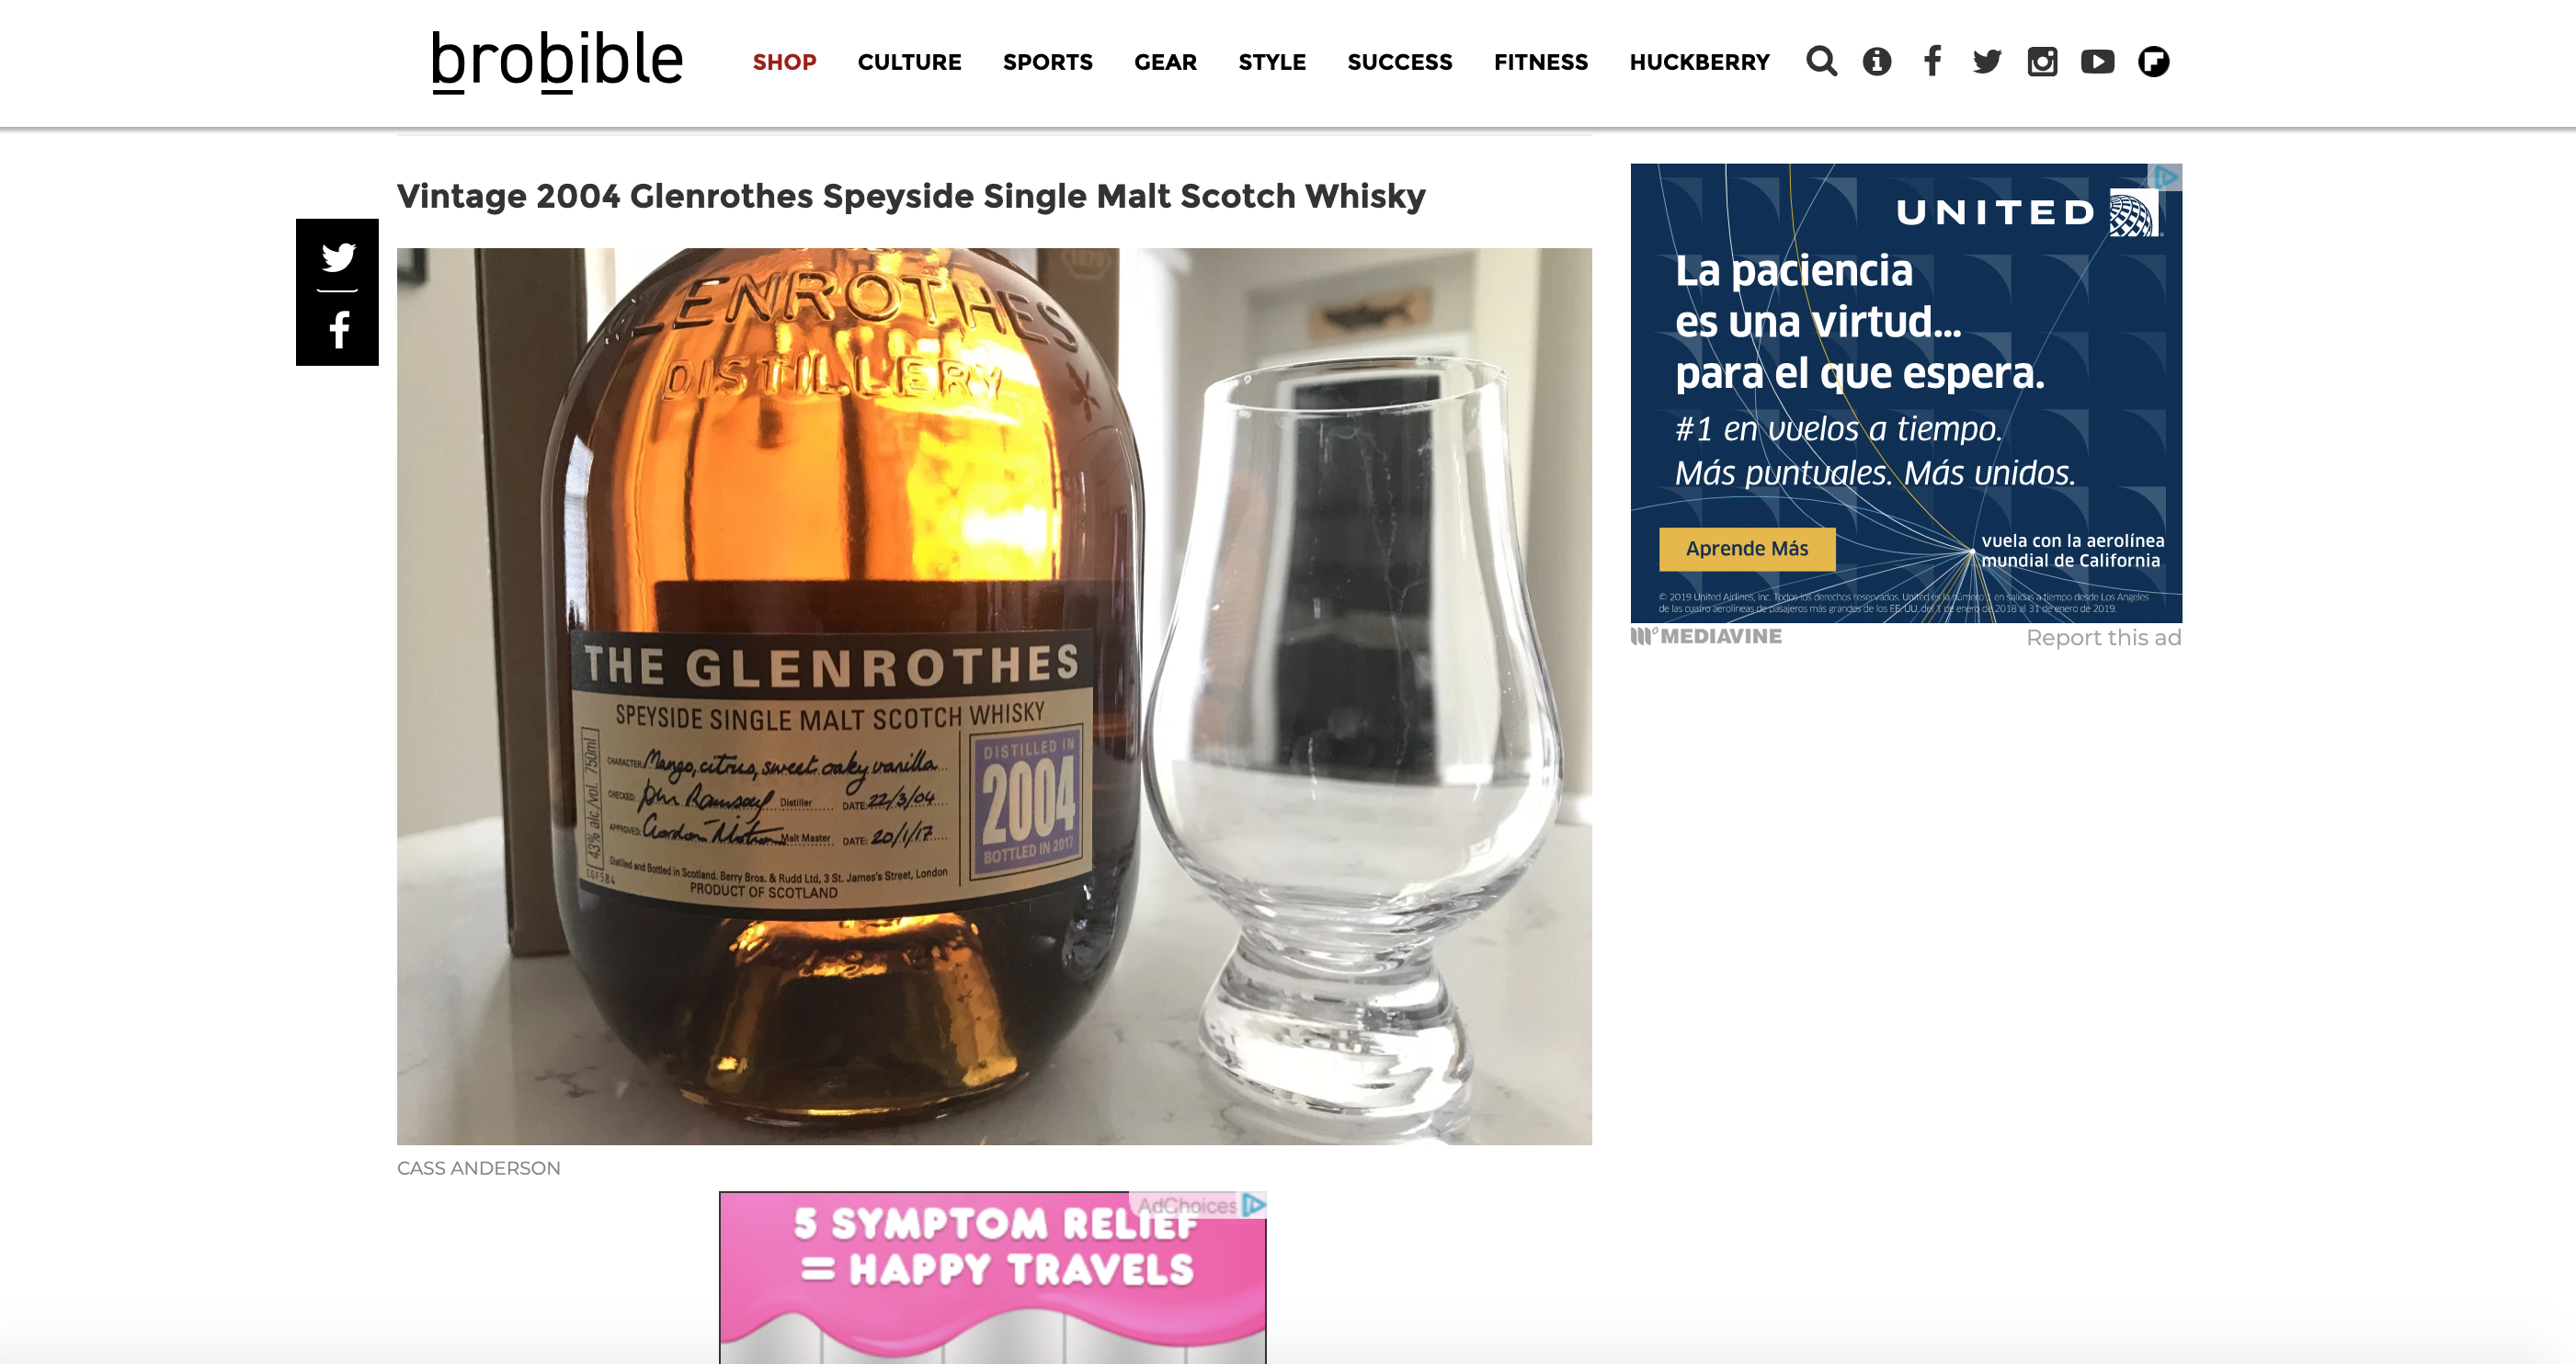 bro bible features the Glenrothes